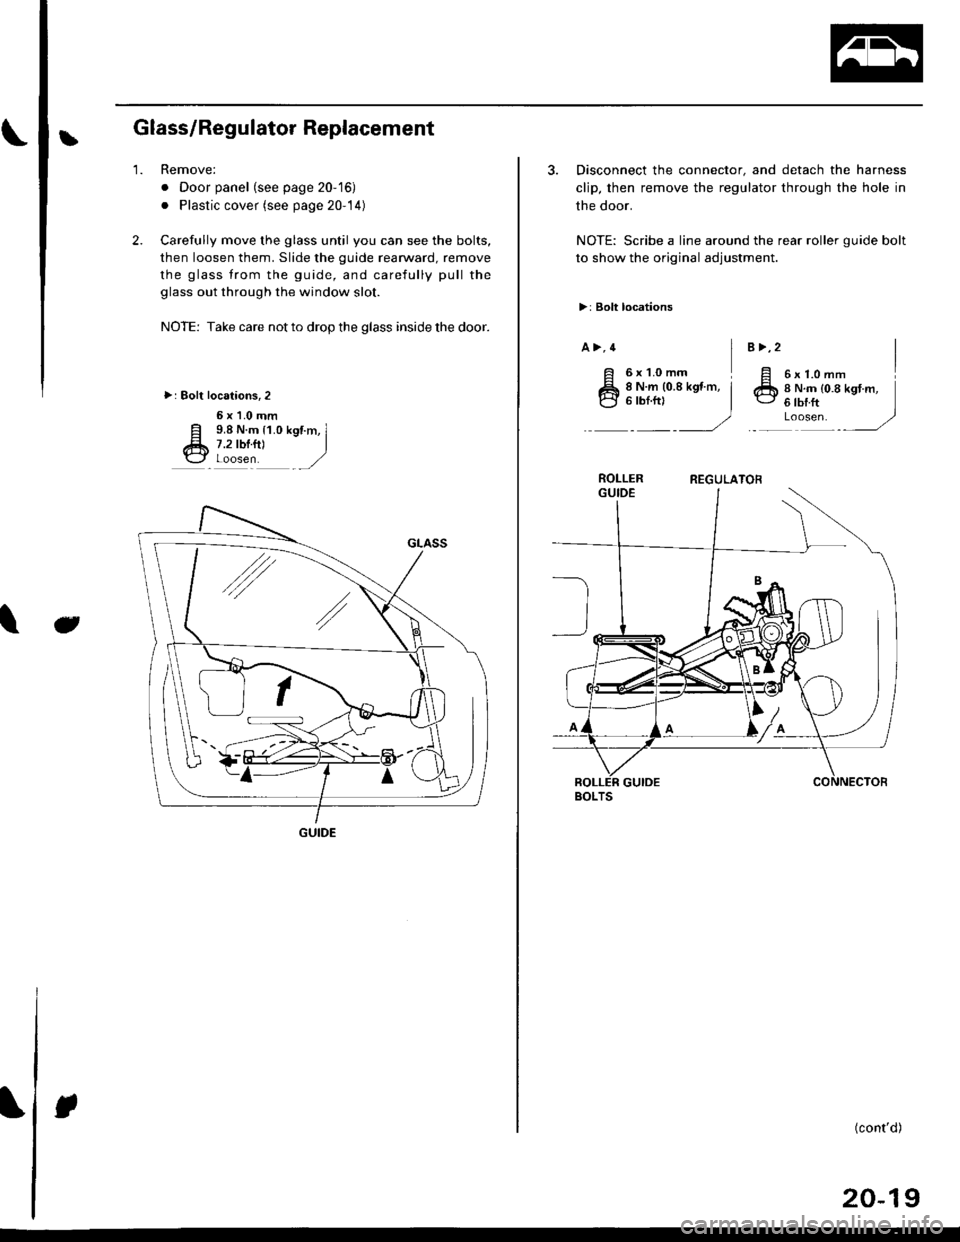 HONDA CIVIC 1999 6.G Workshop Manual LGlass/Regulator Replacement
2.
1.Remove:
. Door panel (see page 20-16)
. Plastic cover (see page 20-14)
Carefully move the glass until you can see the bolts,
then loosen them. Slide the guide rearwa